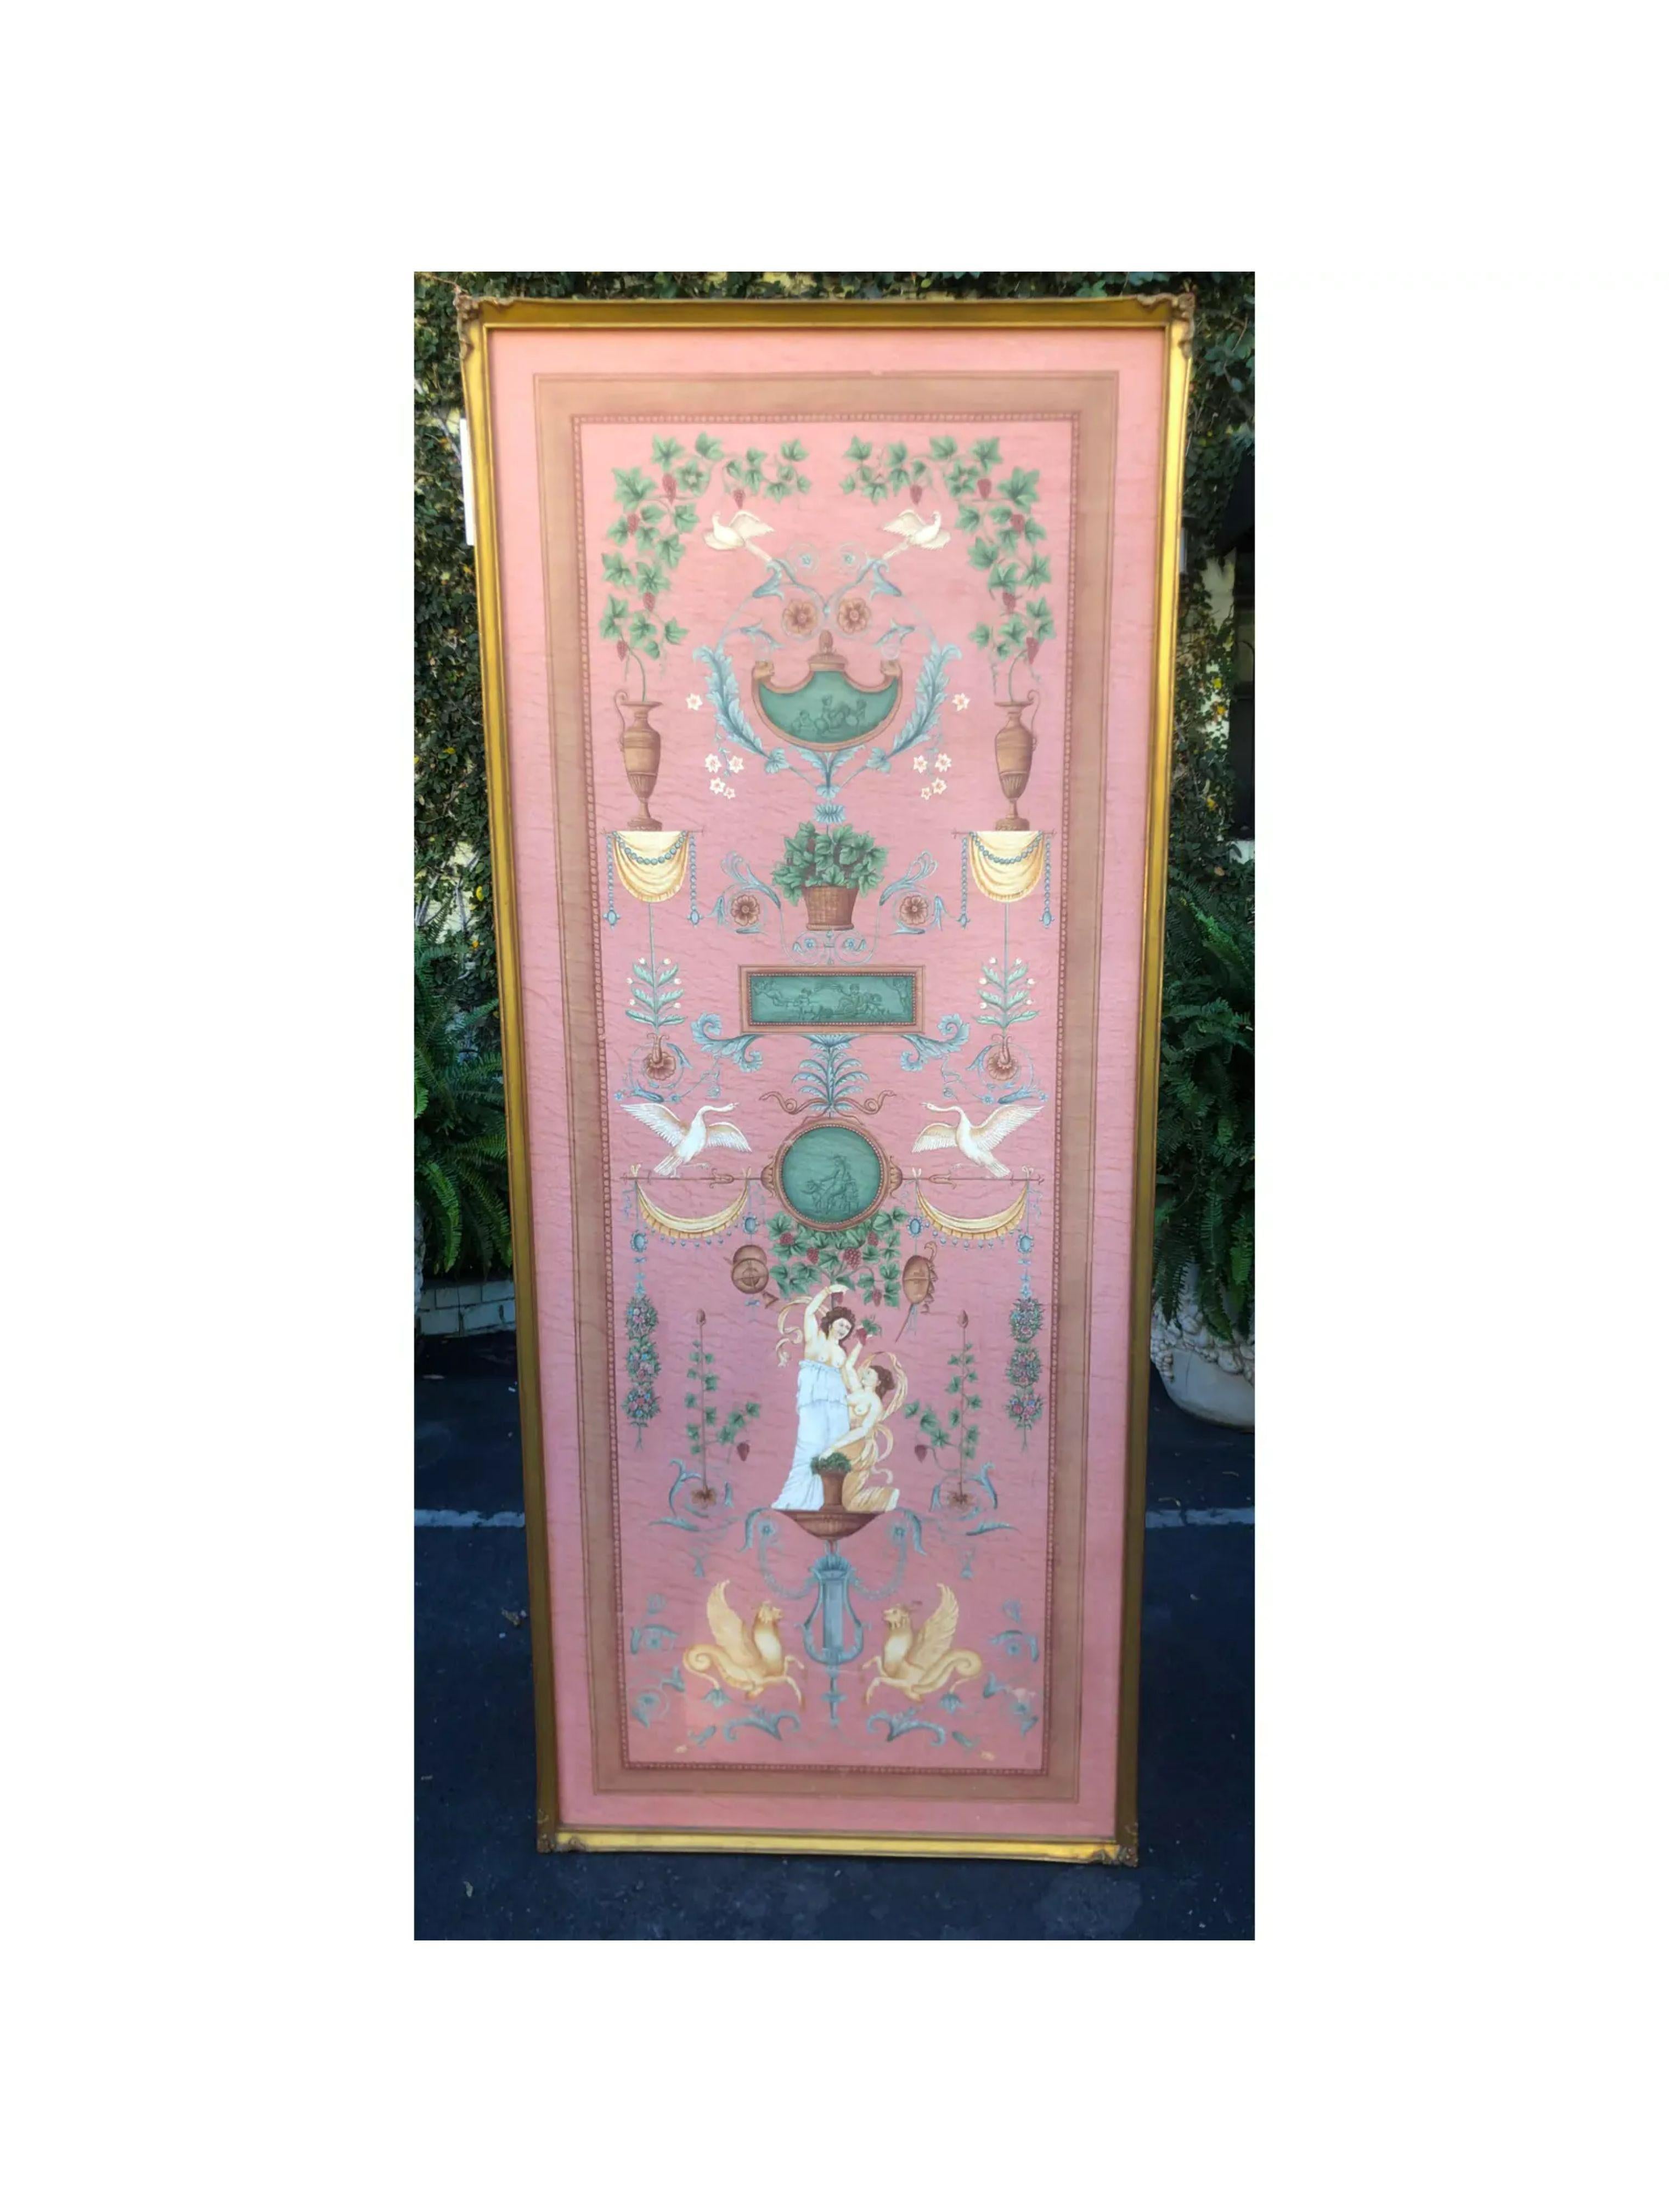 Zuber Style hand painted framed wallpaper panel on canvas. It is beautifully mounted in a Giltwood frame.

Additional information:
Materials: Canvas, Giltwood, Paint
Color: Peach
Period: 1990s
Styles: Belle Epoque
Wallpaper Adhesive Type: